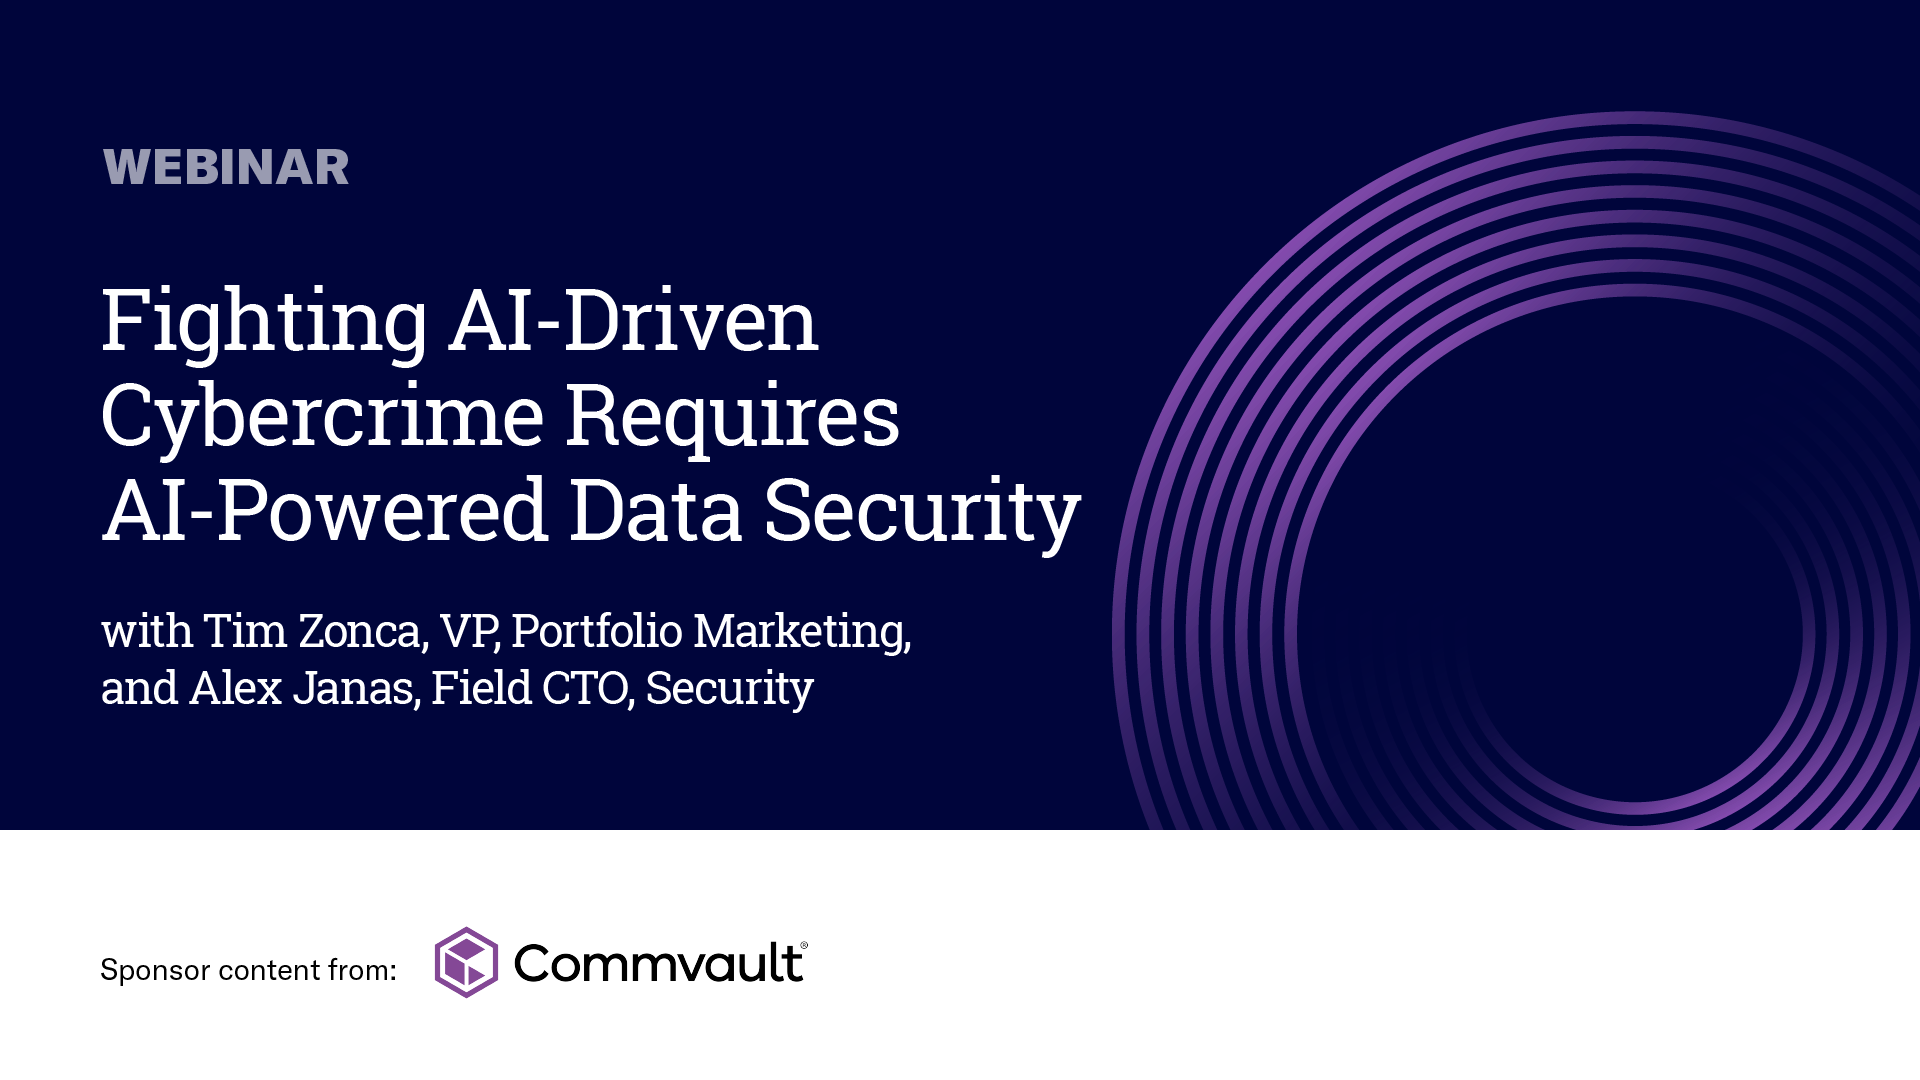 Fighting AI-Driven Cybercrime Requires AI-Powered Data Security - SPONSOR CONTENT WEBINAR FROM COMMVAULT